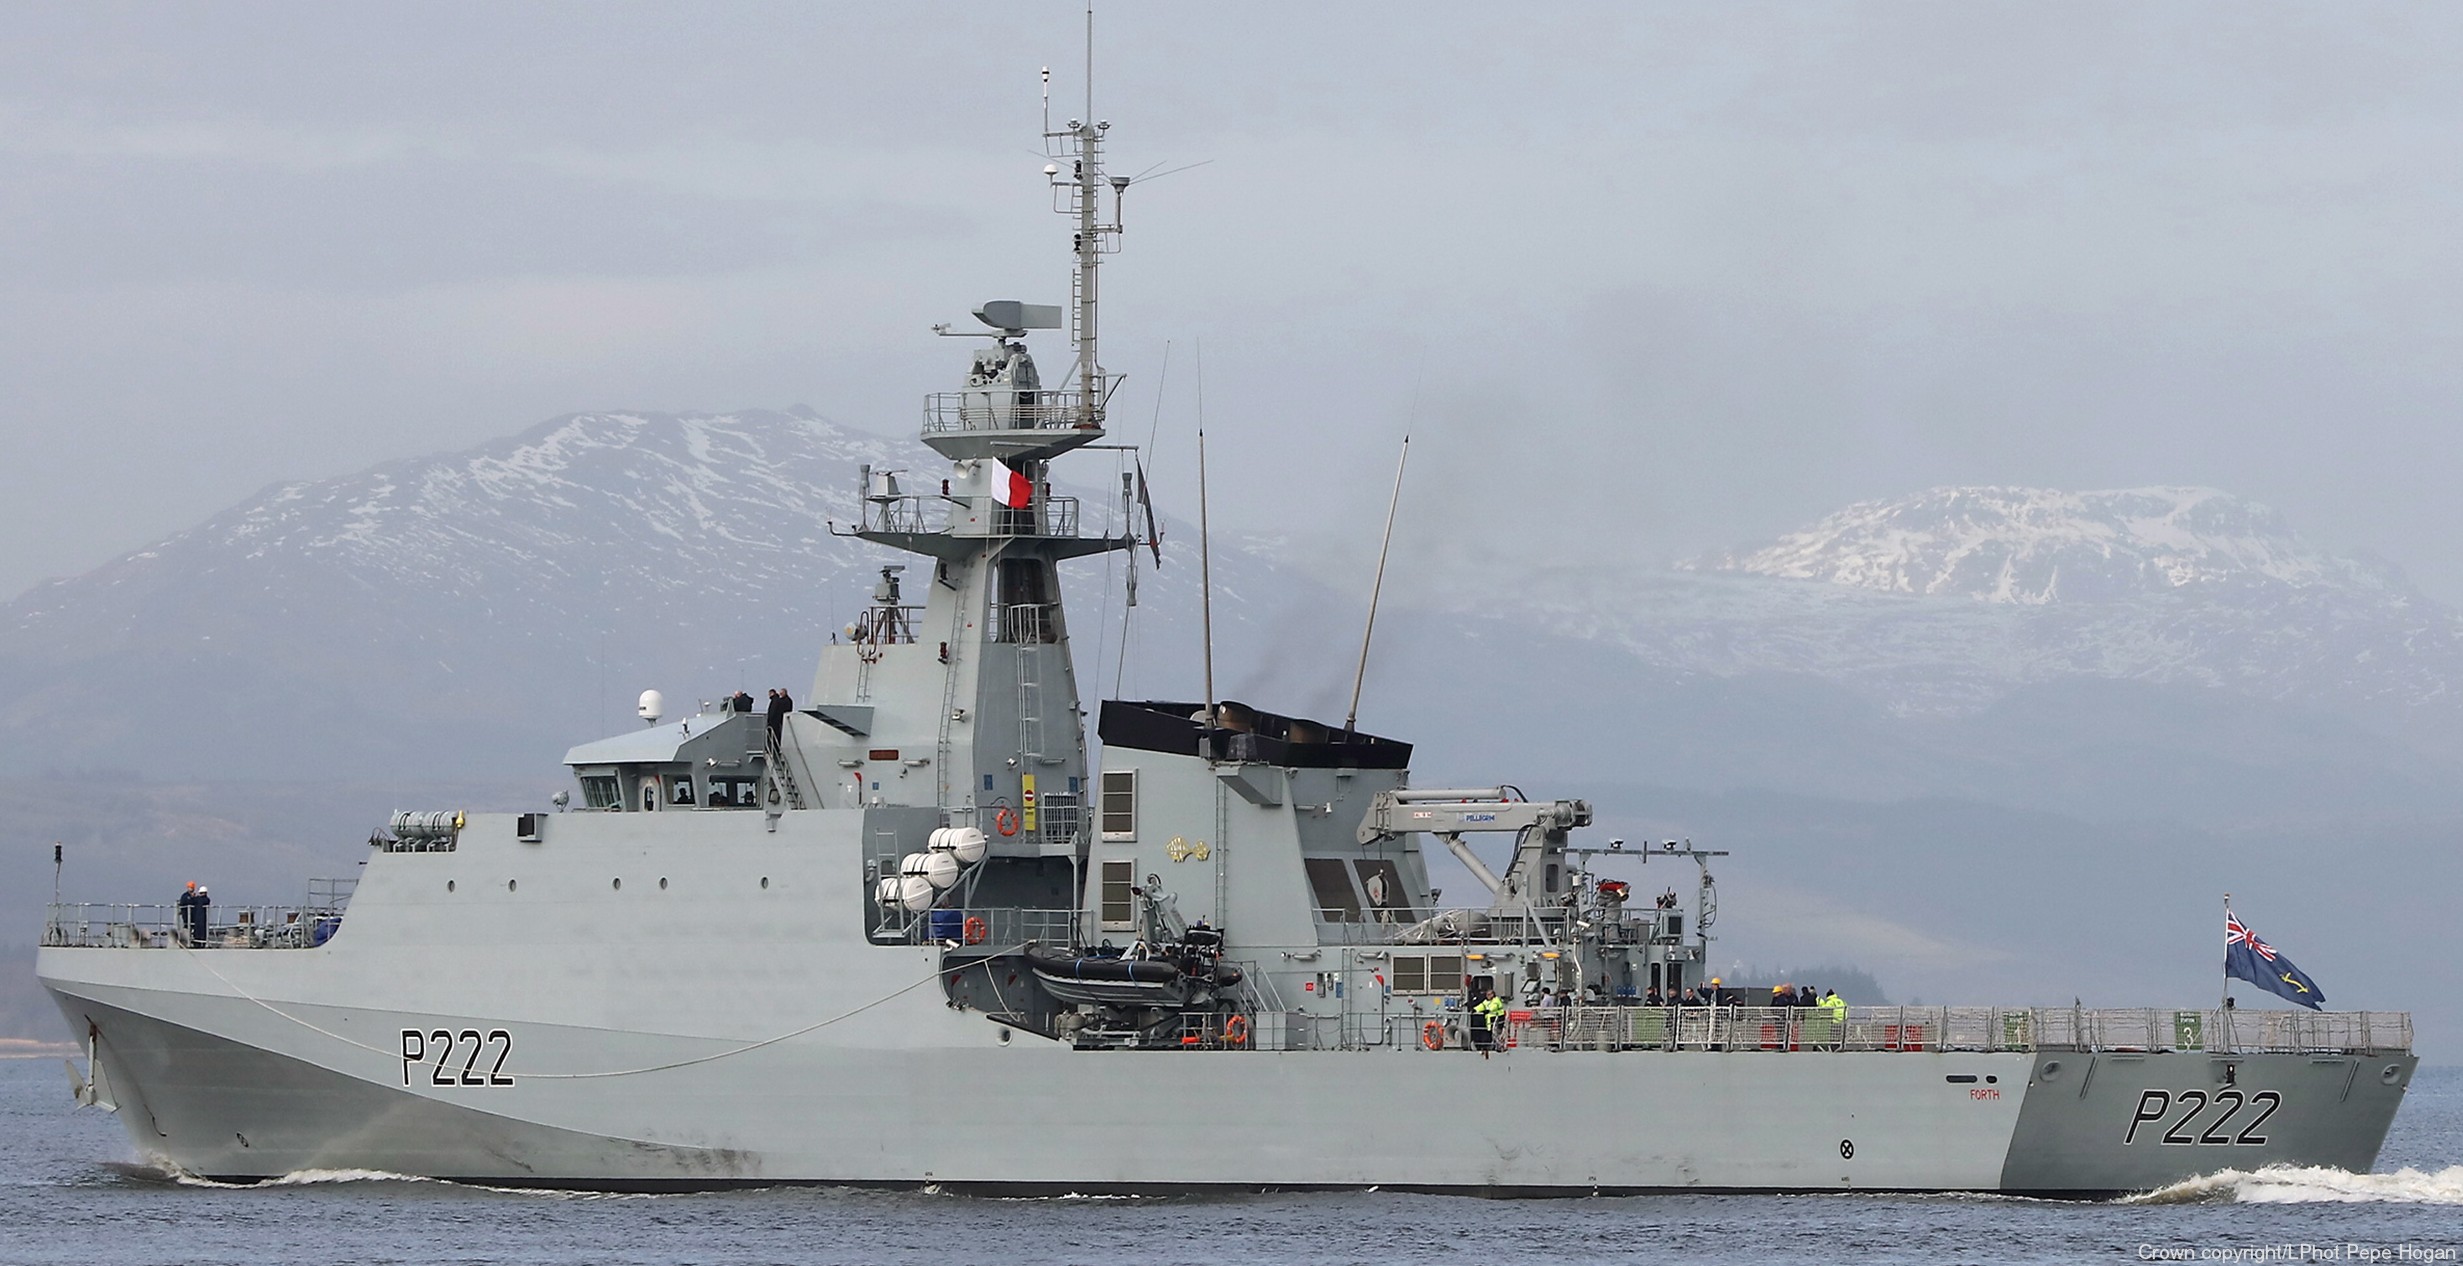 p222 hms forth river class offshore patrol vessel opv royal navy 09